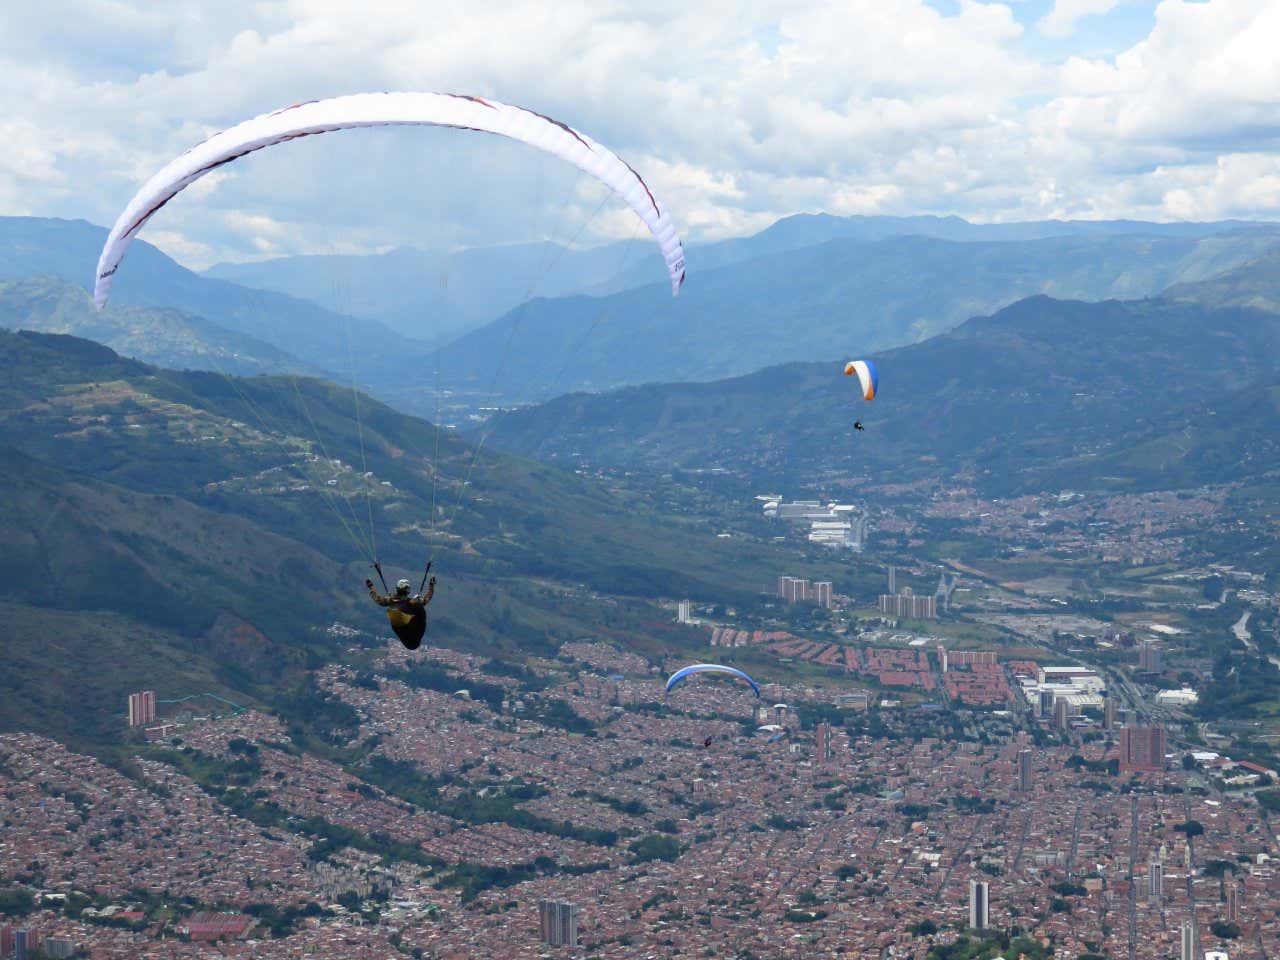 3 paragliders gliding above the city in Medellín Colombia, with jungle views in the background.